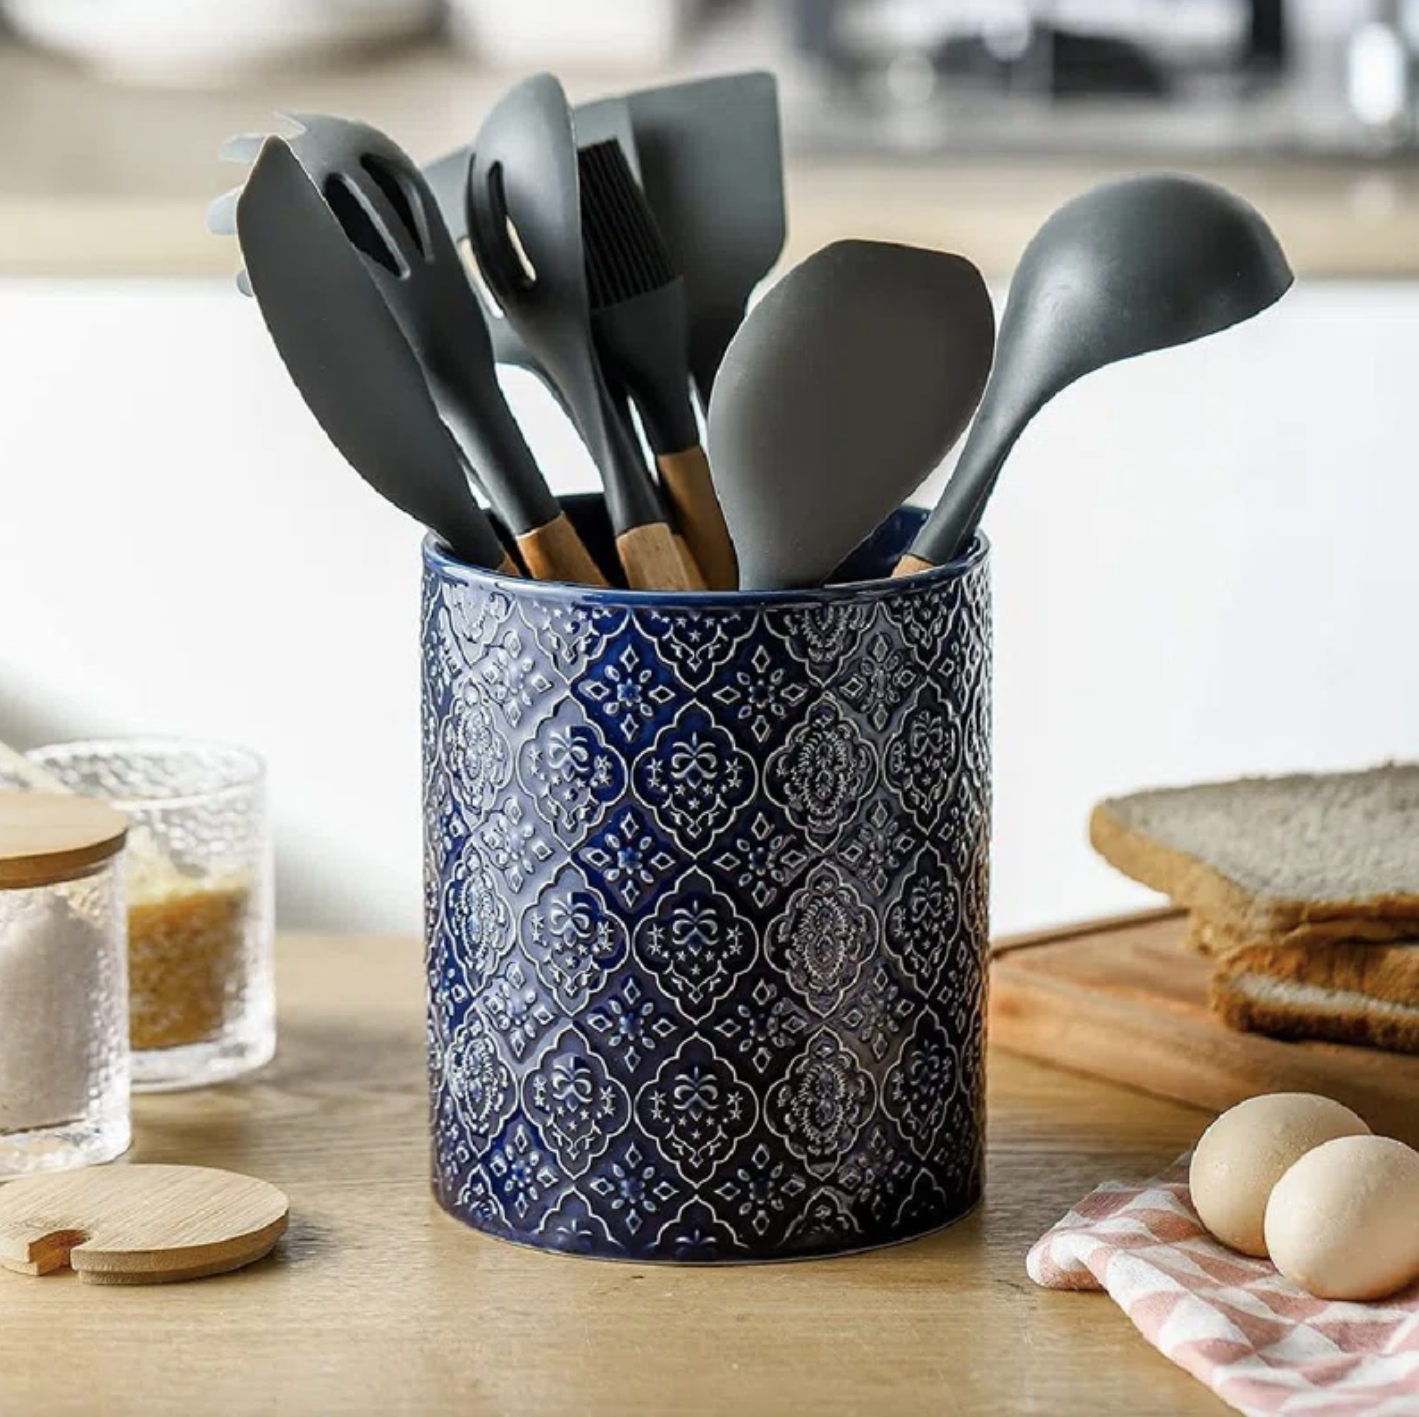 42 Genius Tips (and Products!) for the Most Organized Kitchen Ever